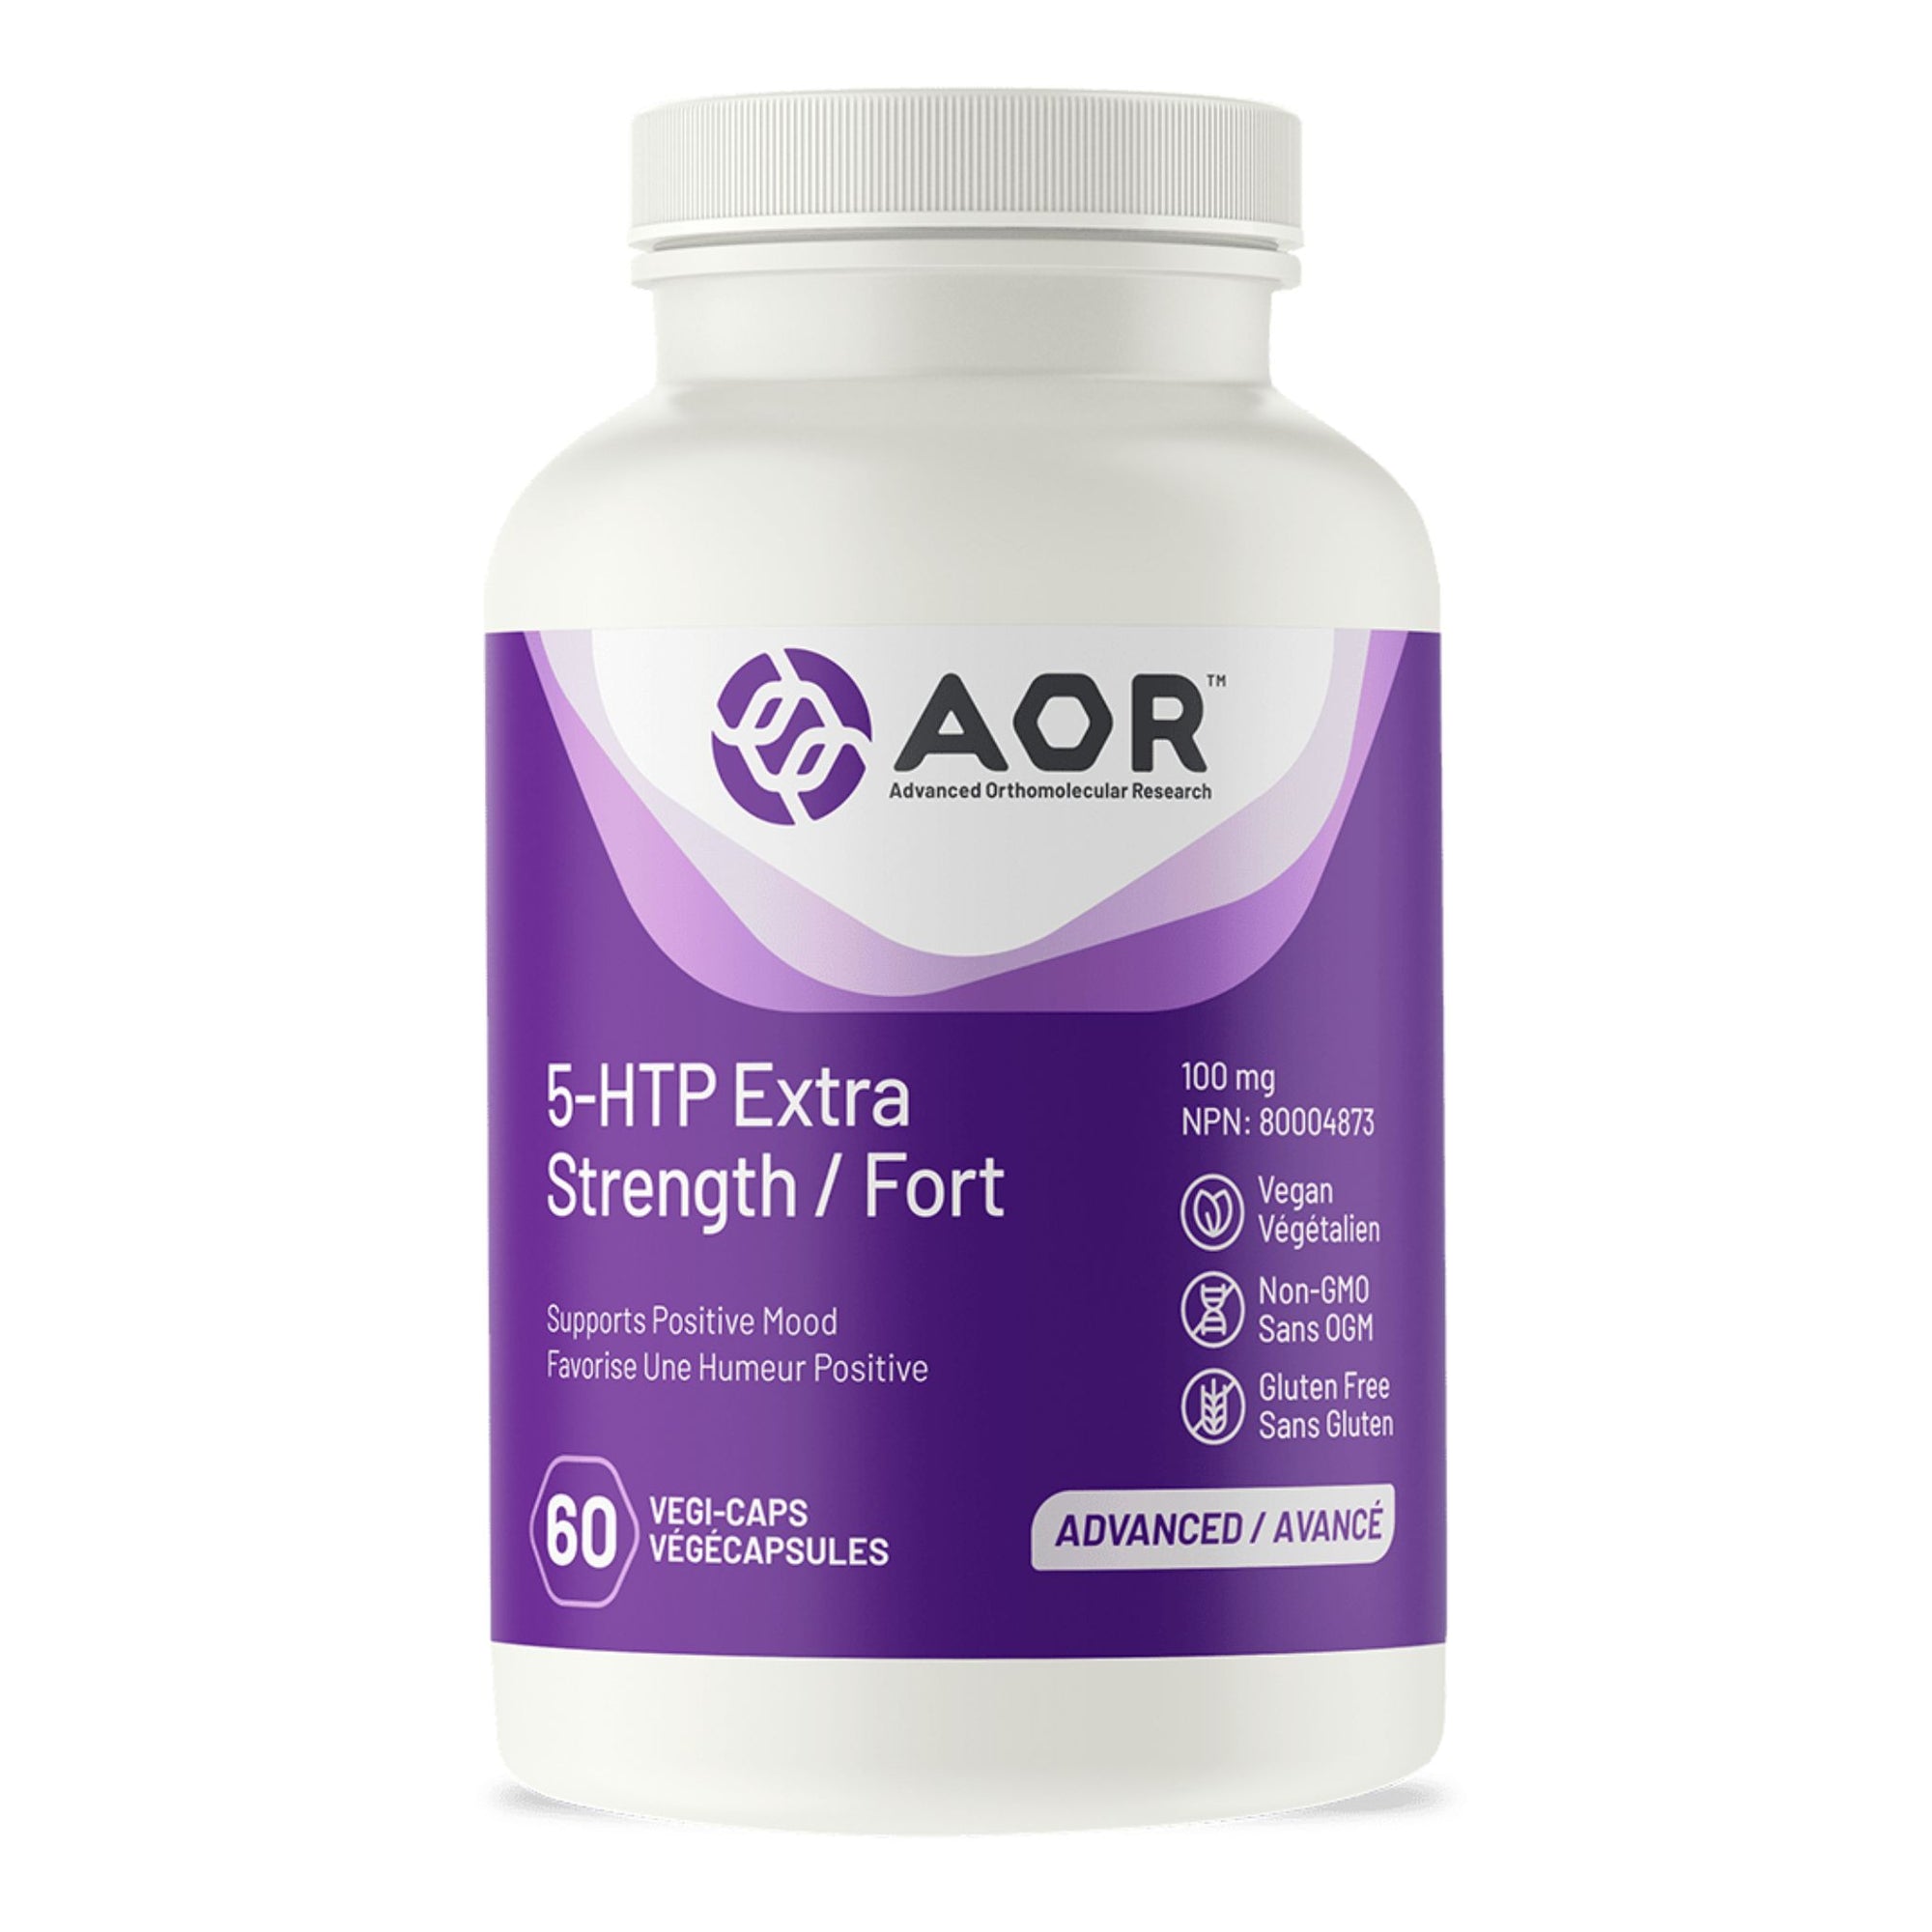 AOR 5-HTP Extra Strength 100mg 60 Vegetable Capsules - a supplement that Supports Positive Mood - Vegan. Non-GMO and Gluten Free.